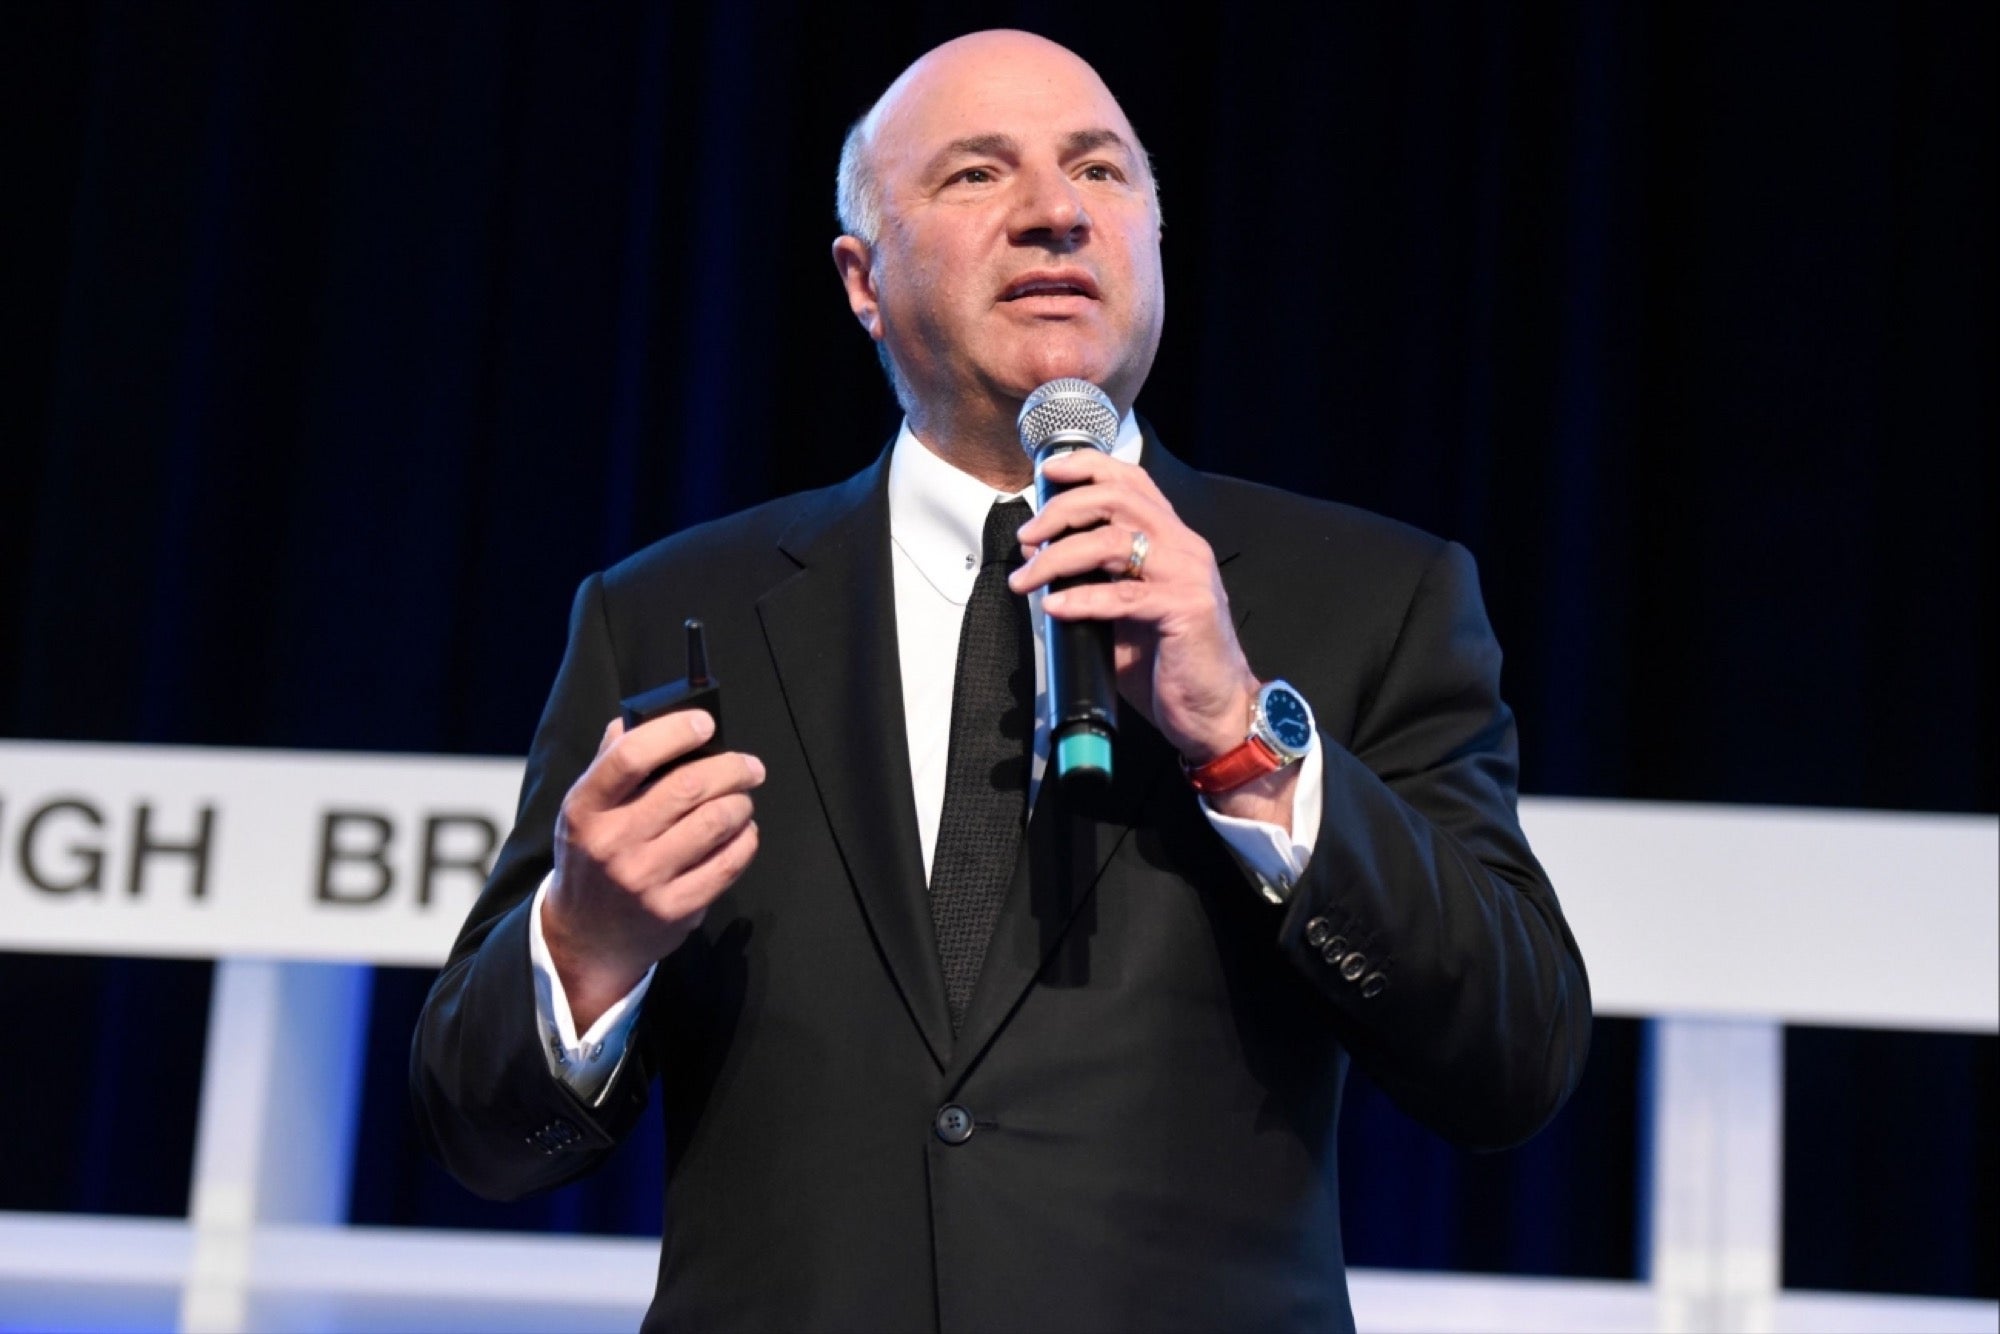 Kevin O’Leary Says FTX Should be Audited and Defends SBF